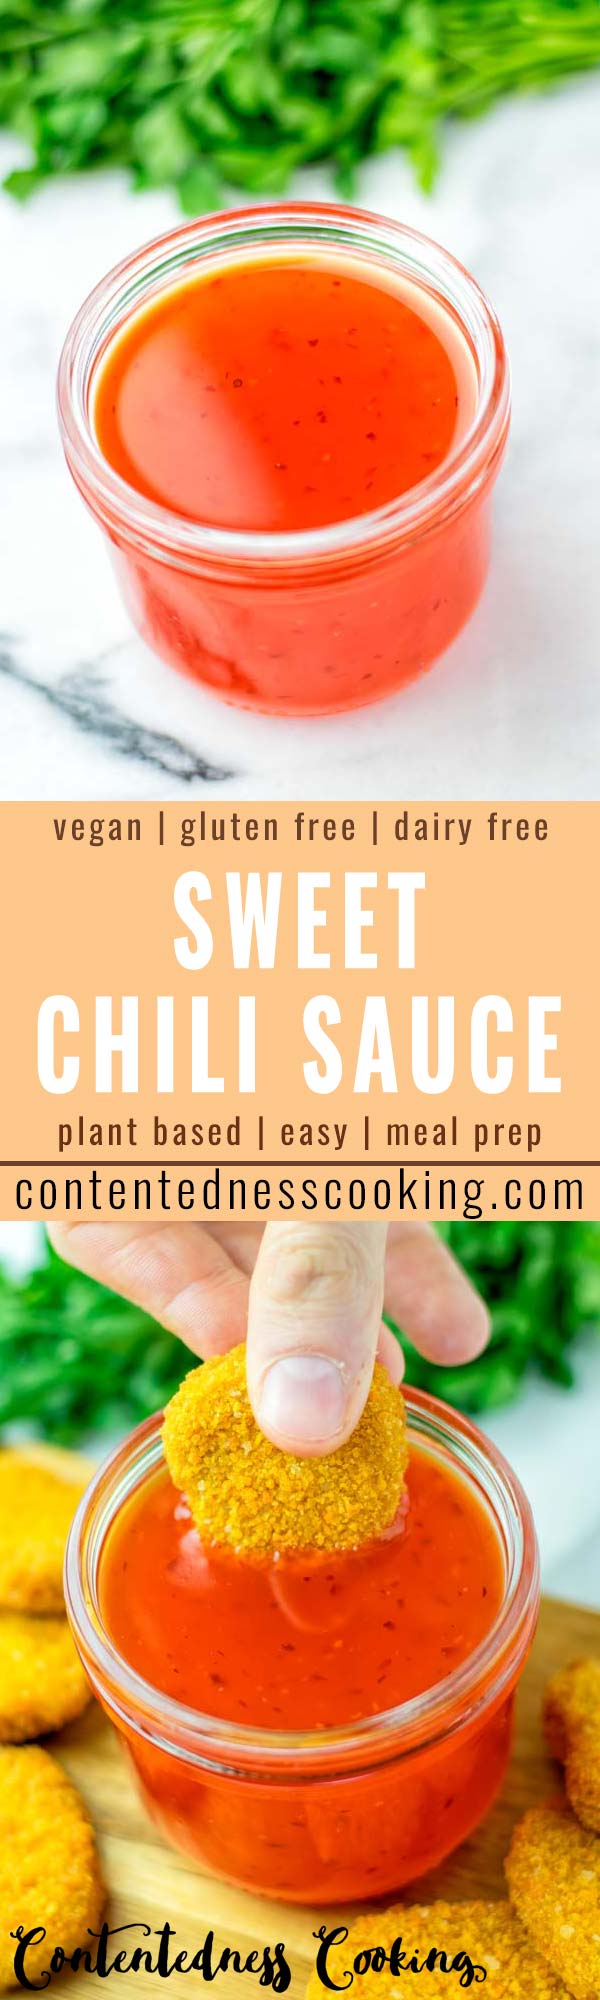 Make this Sweet Chili Sauce at home so delicious and versatile for many things. Homemade tastes so much better and will beat store bought in no time. Naturally vegan, gluten free and packed with such amazing flavors. Once you’ve tried it you know you need this condiment everyday. Great for dinner, lunch, meal prep that the whole family will love. #vegan #dairyfree #glutenfree #sweetchilisauce #vegetarian #contentednesscooking #dinner #lunch #mealprep #comfortfood #condiments